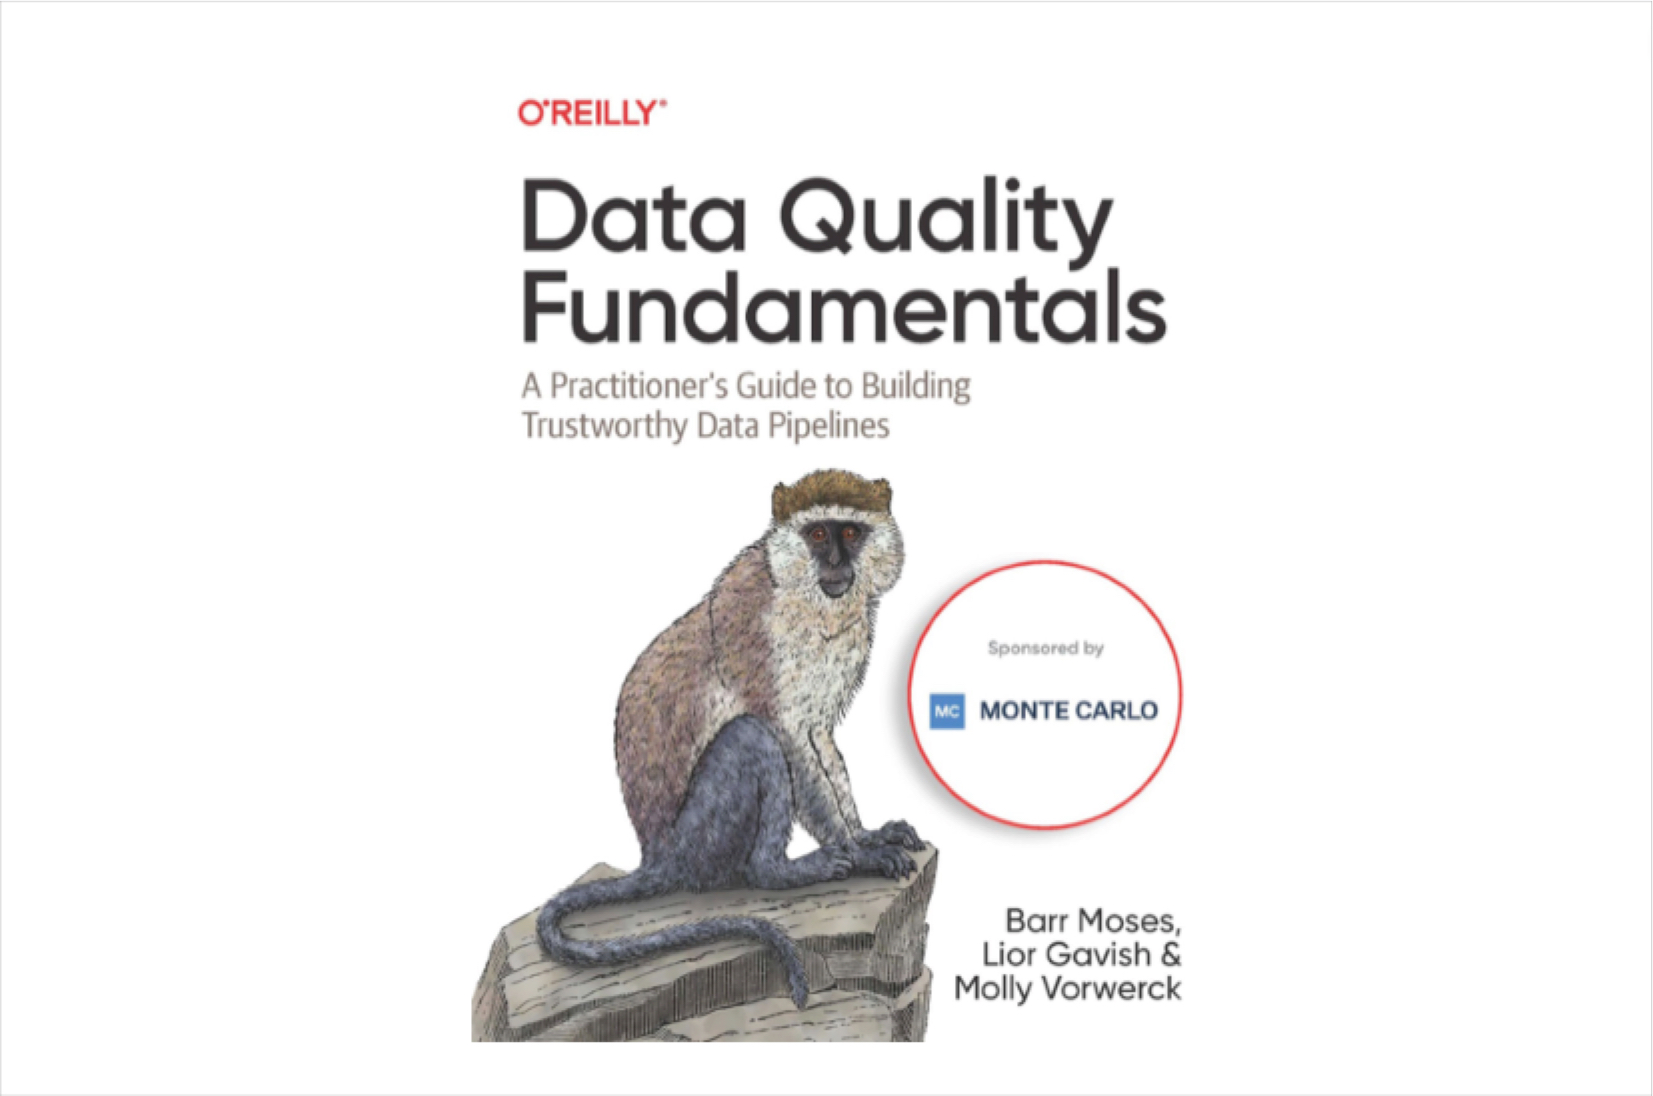 The Significance of O’Reilly’s Data Quality Fundamentals